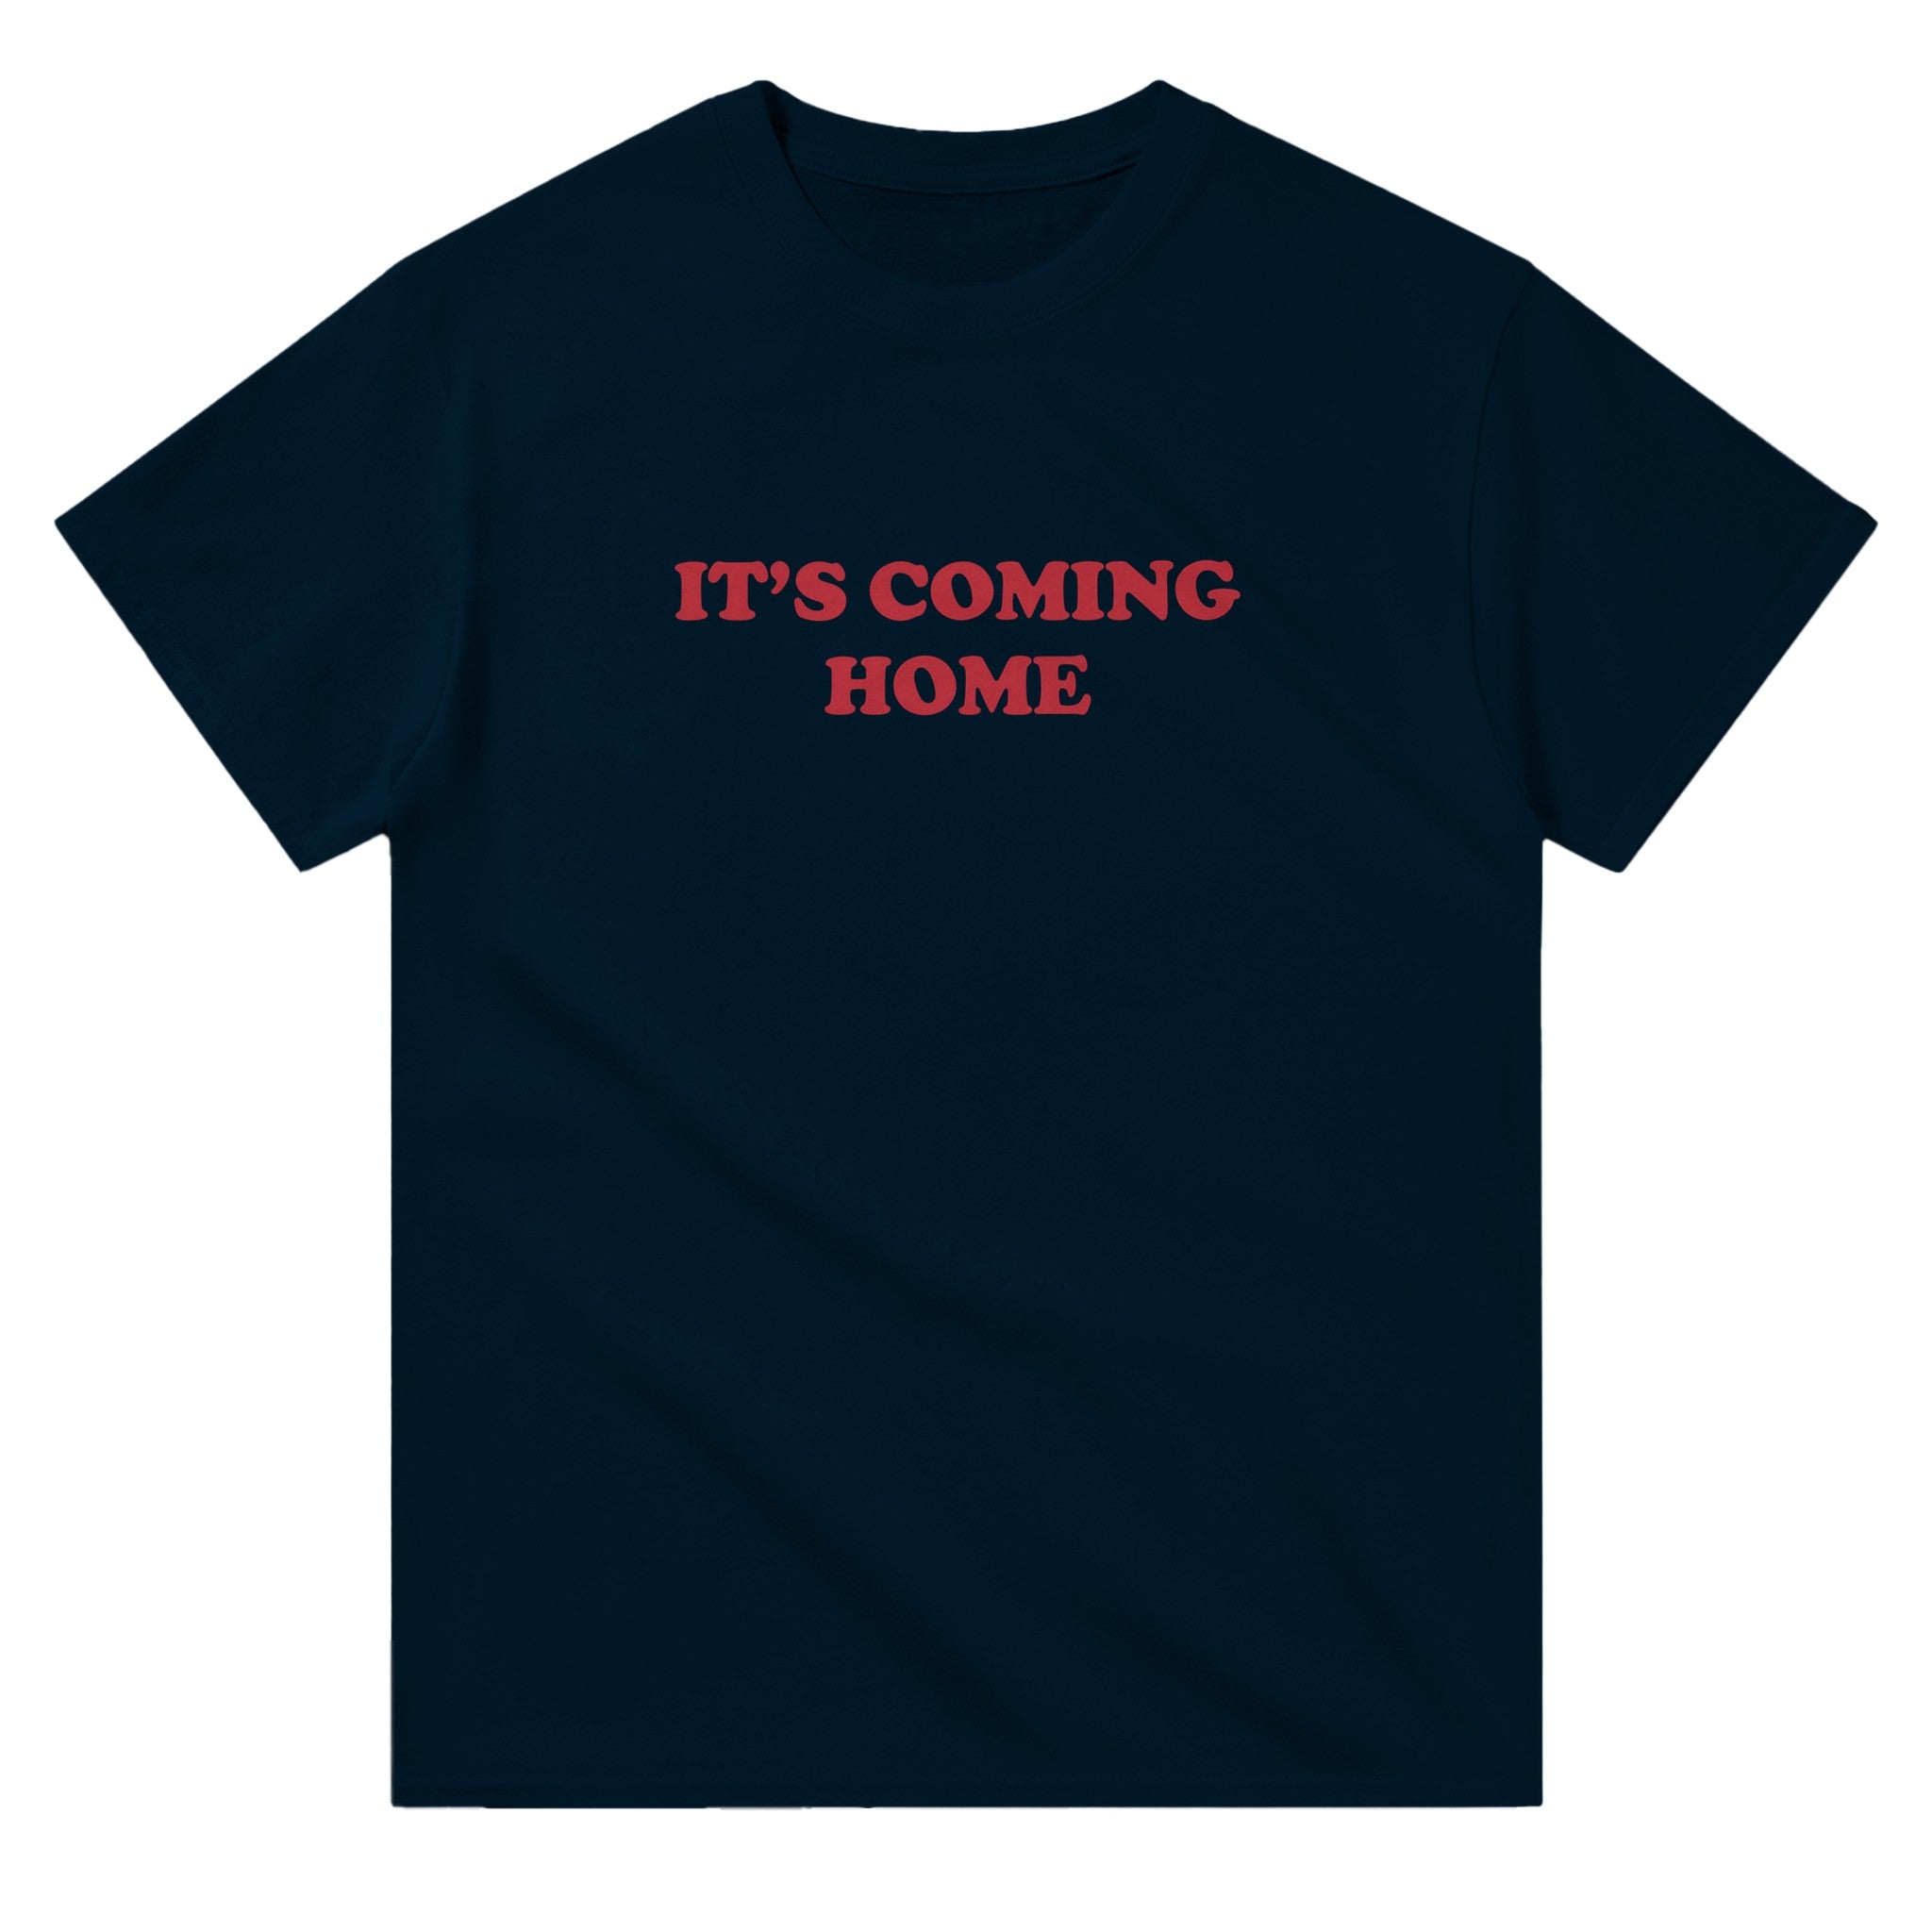 'It's Coming Home' classic tee - In Print We Trust